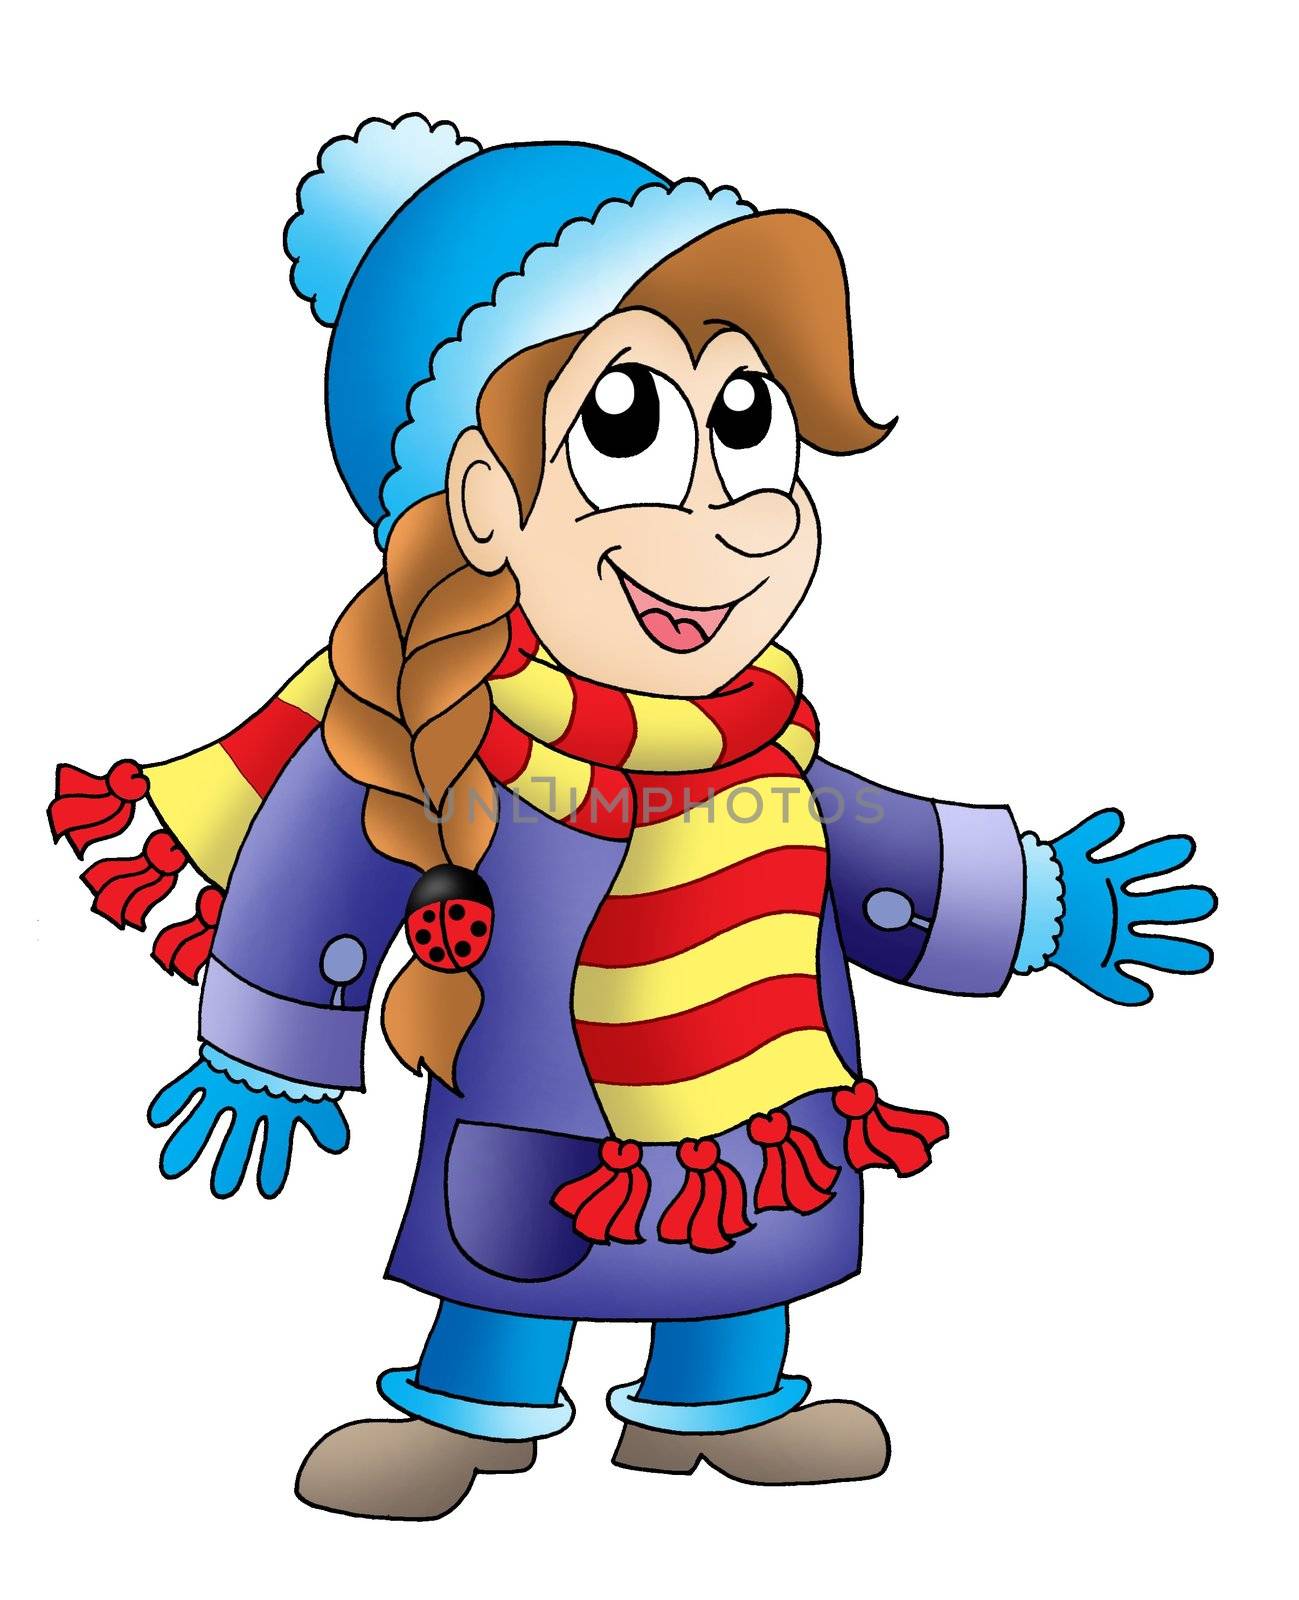 Girl in winter outfit - color illustration.